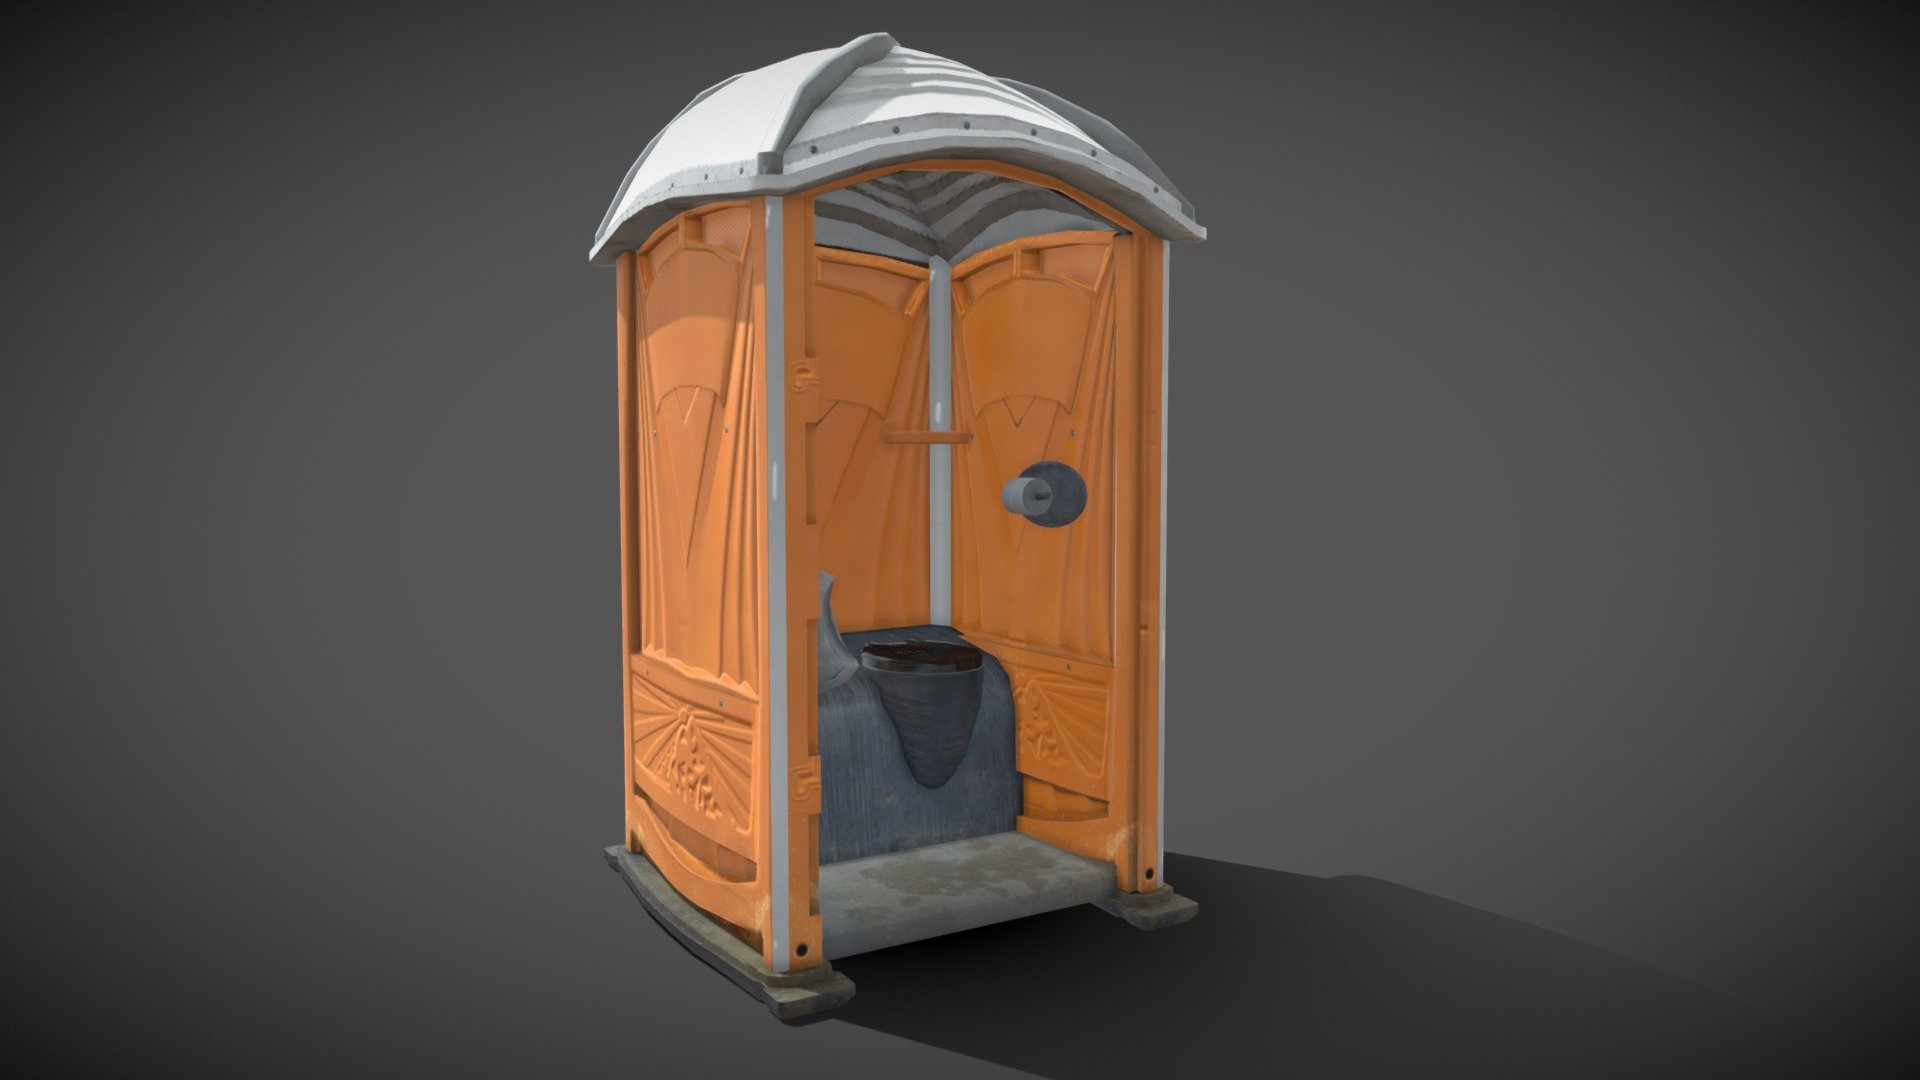 One of the assets that I made while I was working on a month-short contract for Henry G20 group.

It is a portapotty that was in a detention cell 3d model